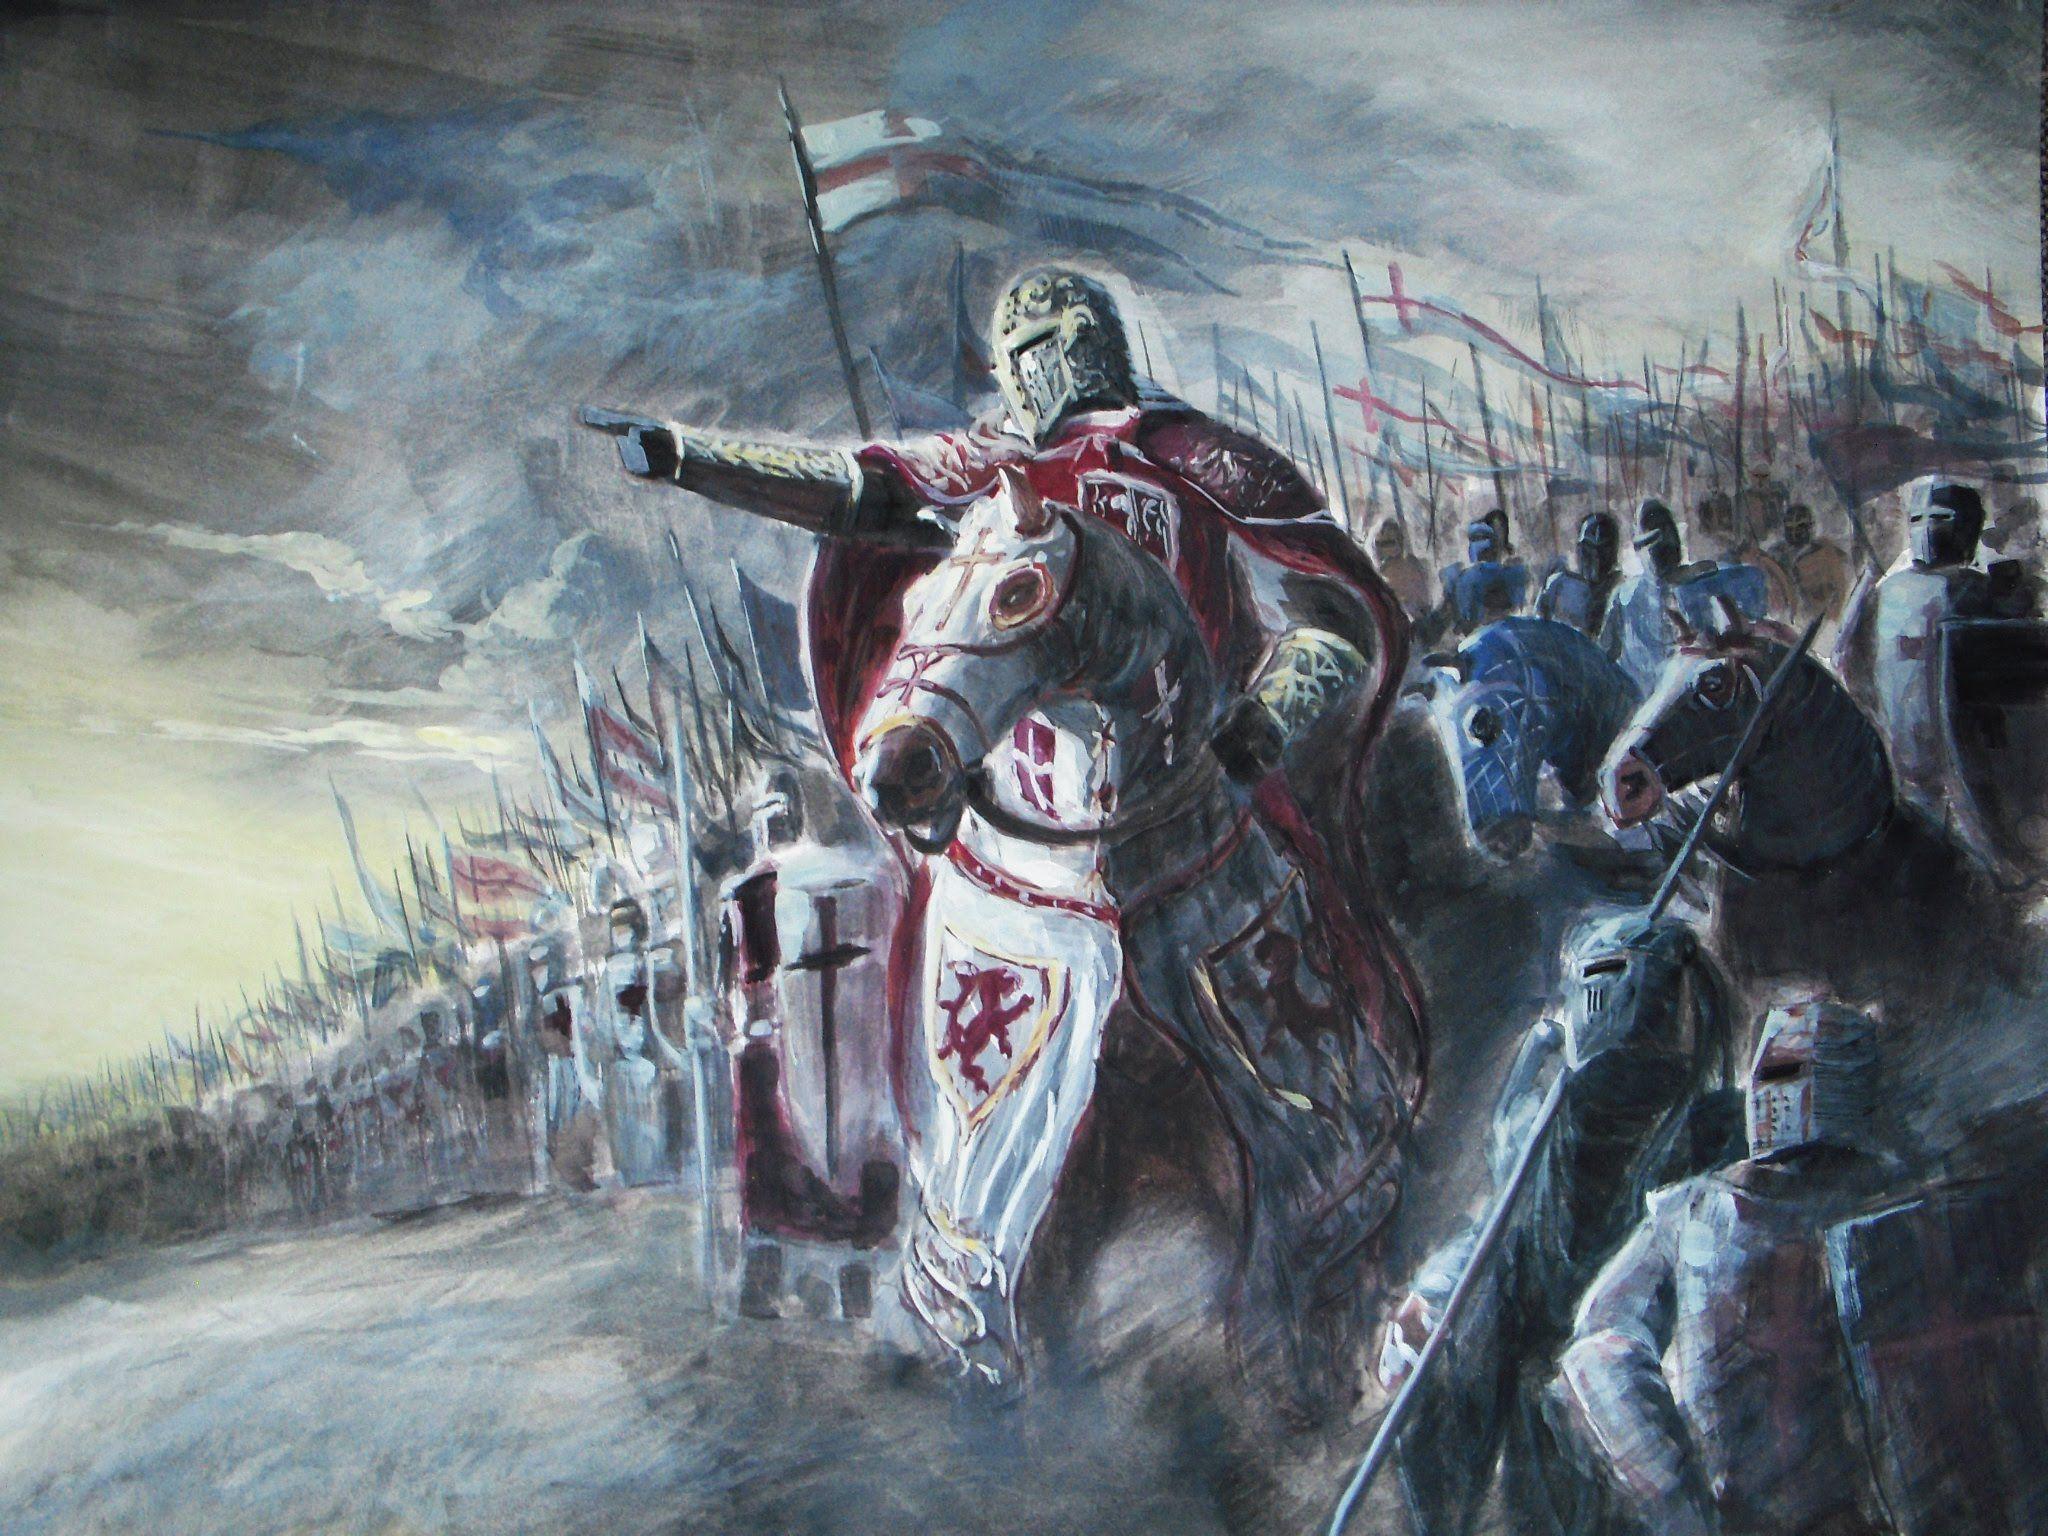 March of the Templars: The Crusades